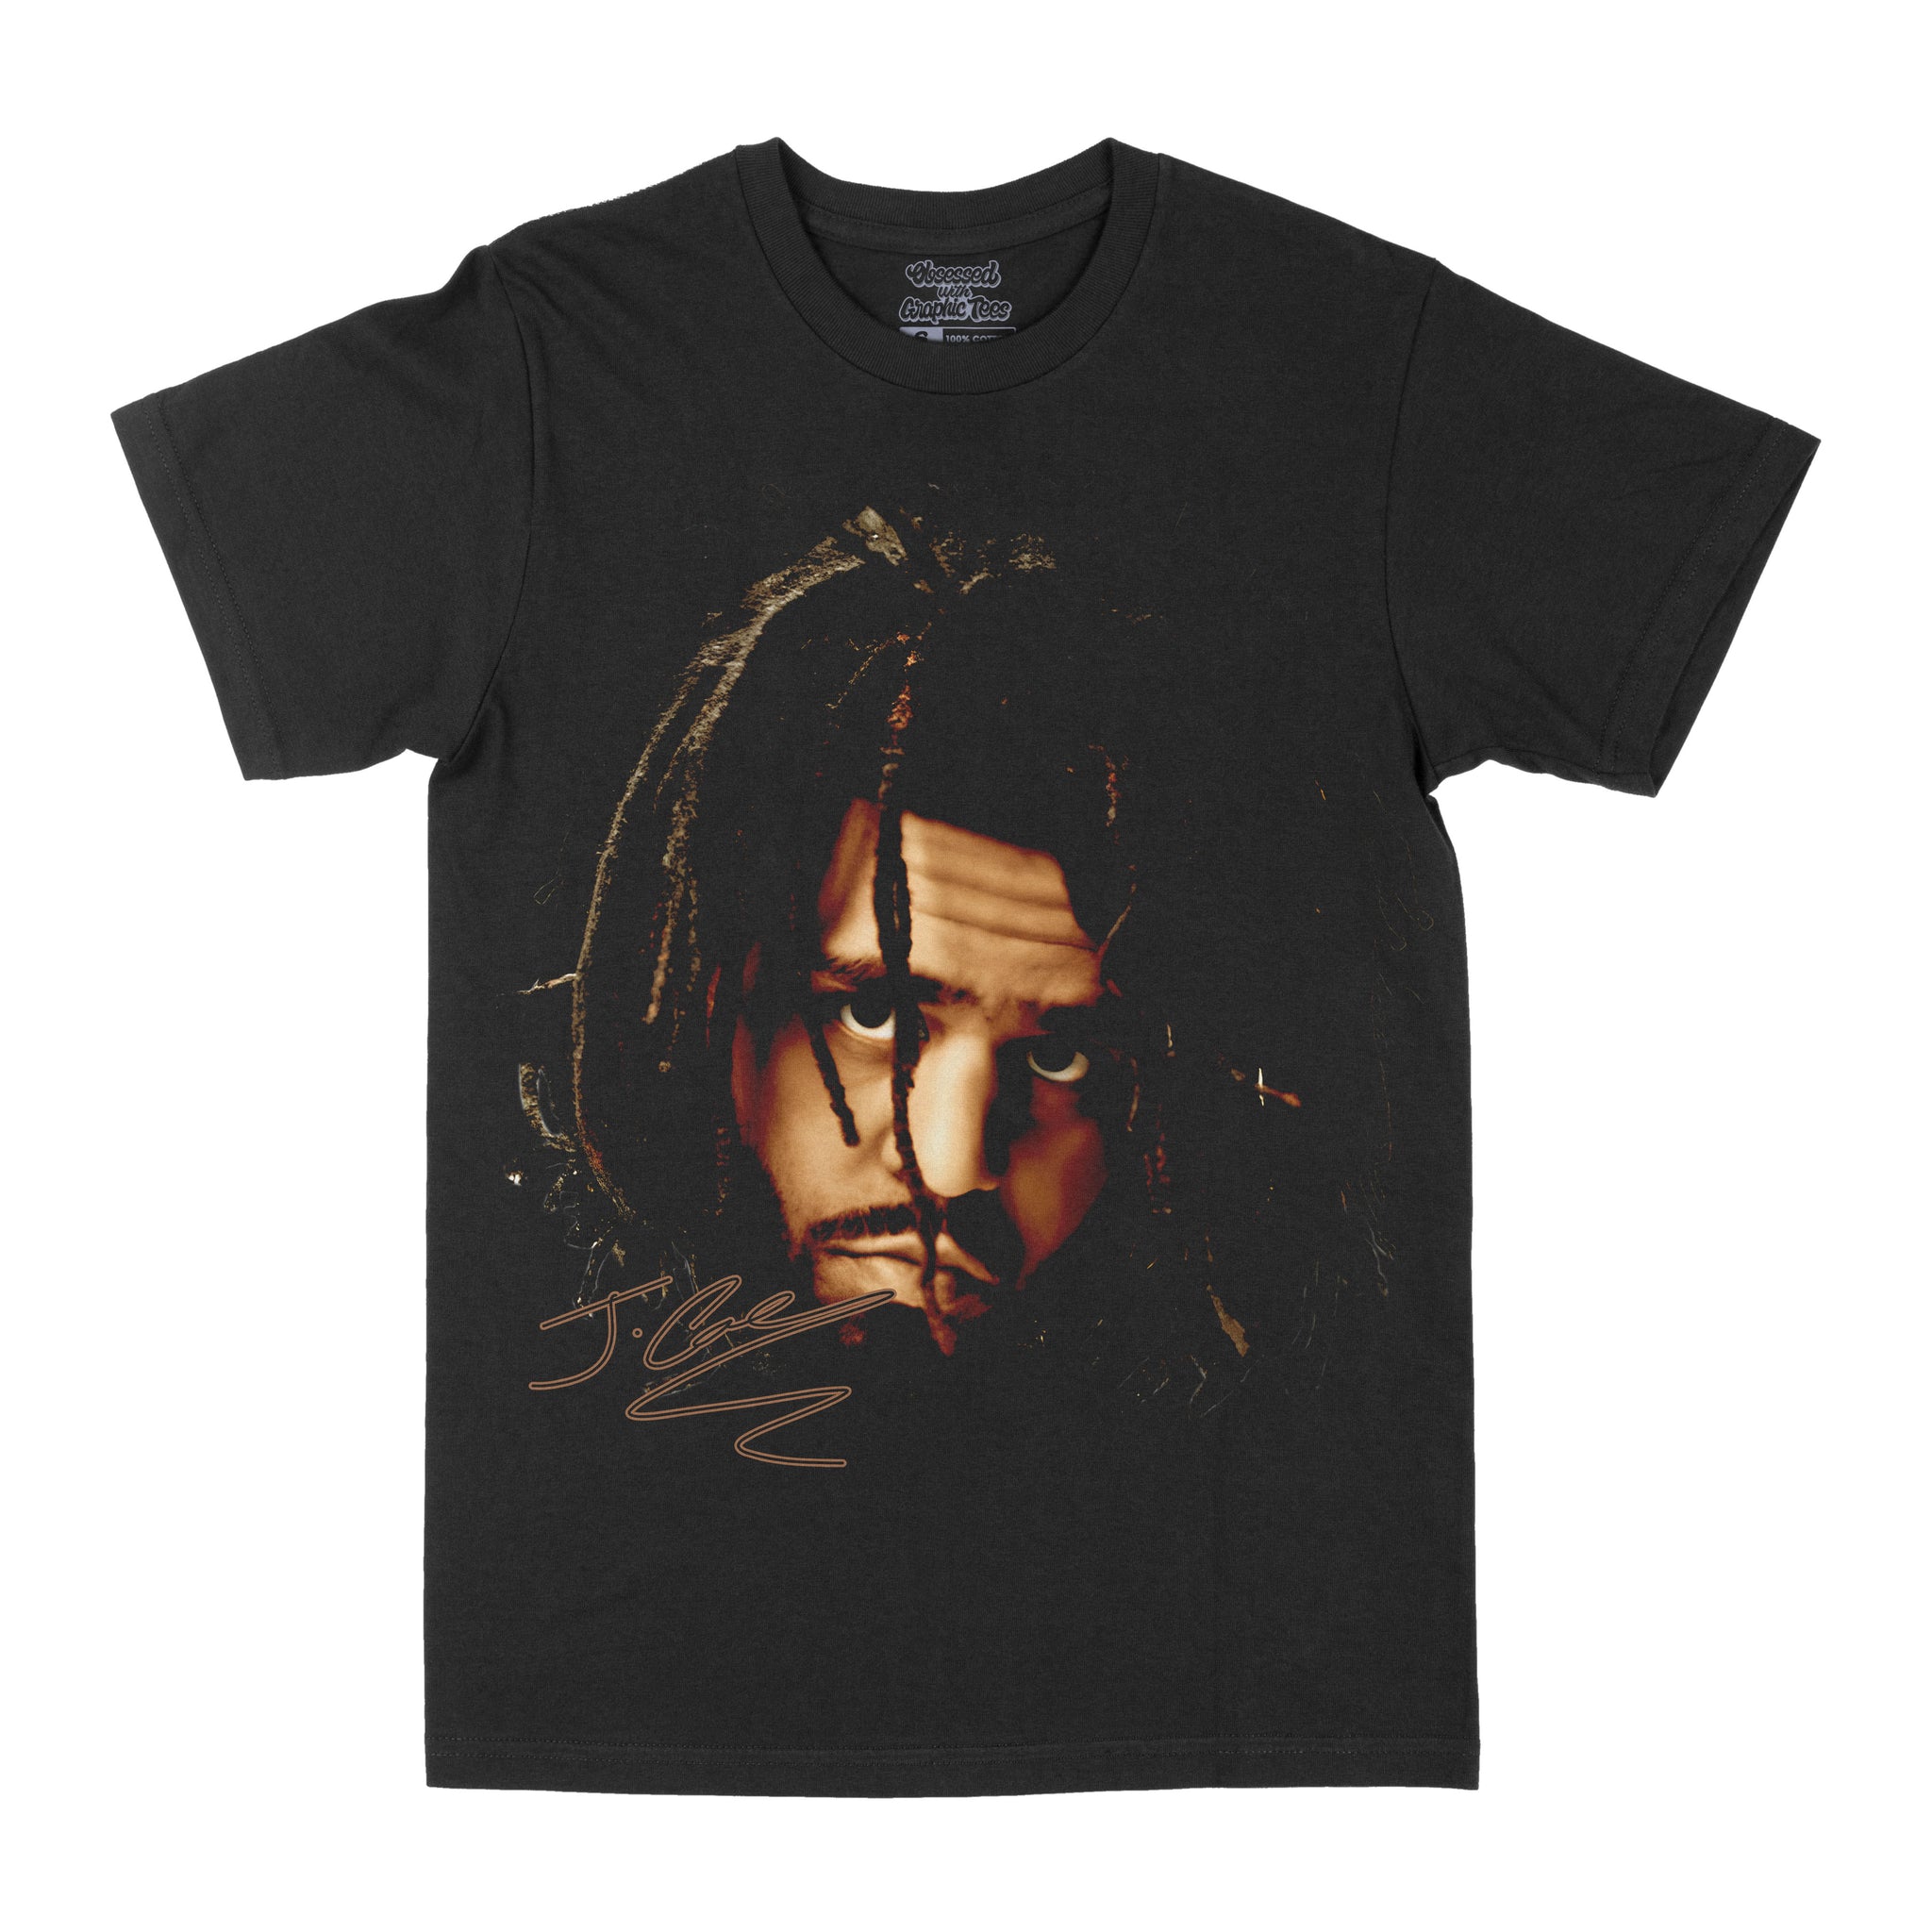 J. Cole "Big Face" Graphic Tee